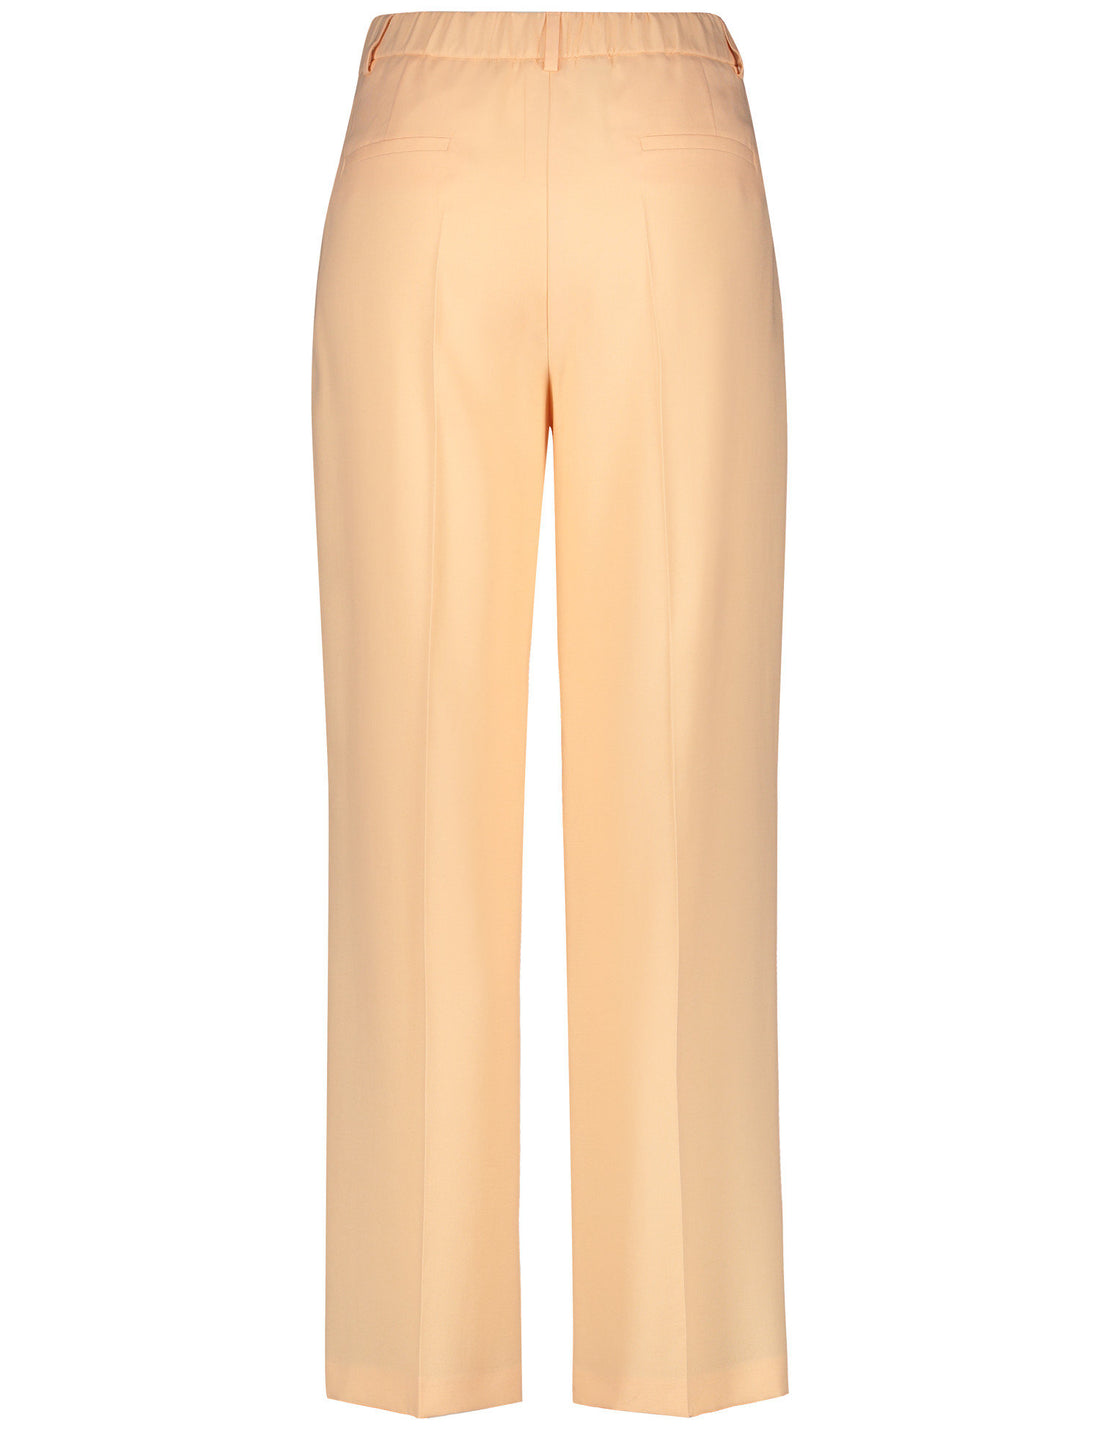 Elegant Trousers With Pressed Pleats_320021-31267_60315_02